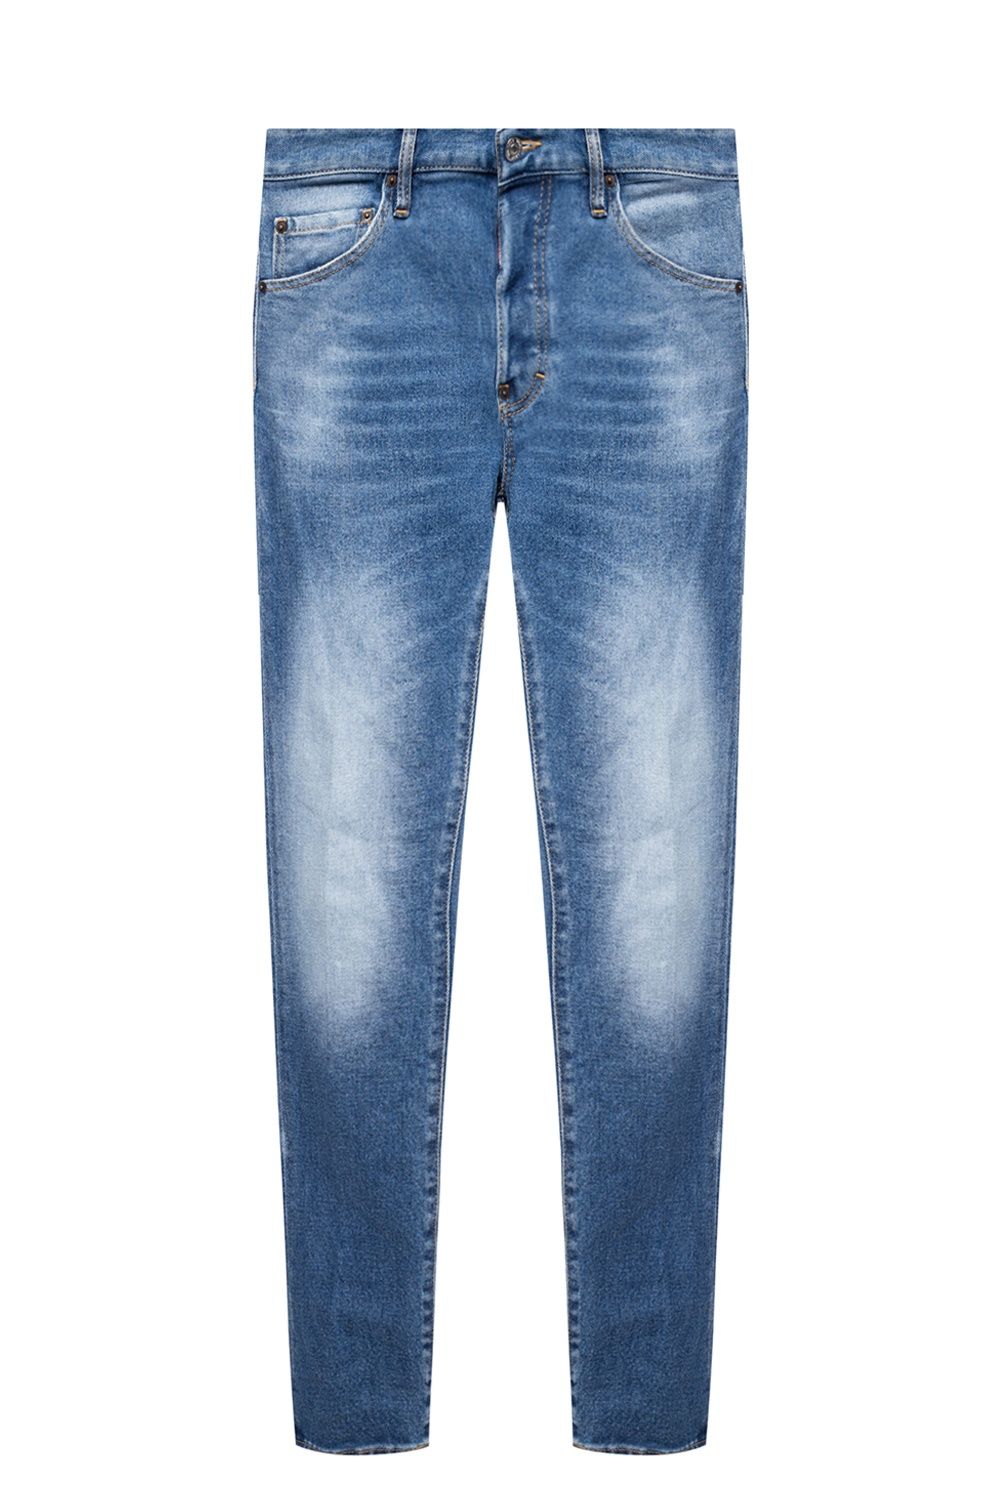 Blue ‘Cool Guy Jean’ Dsquared² Men's Jeans - Designed by Dsquared² Available to Buy at a Discounted Price on Moon Behind The Hill Online Designer Discount Store